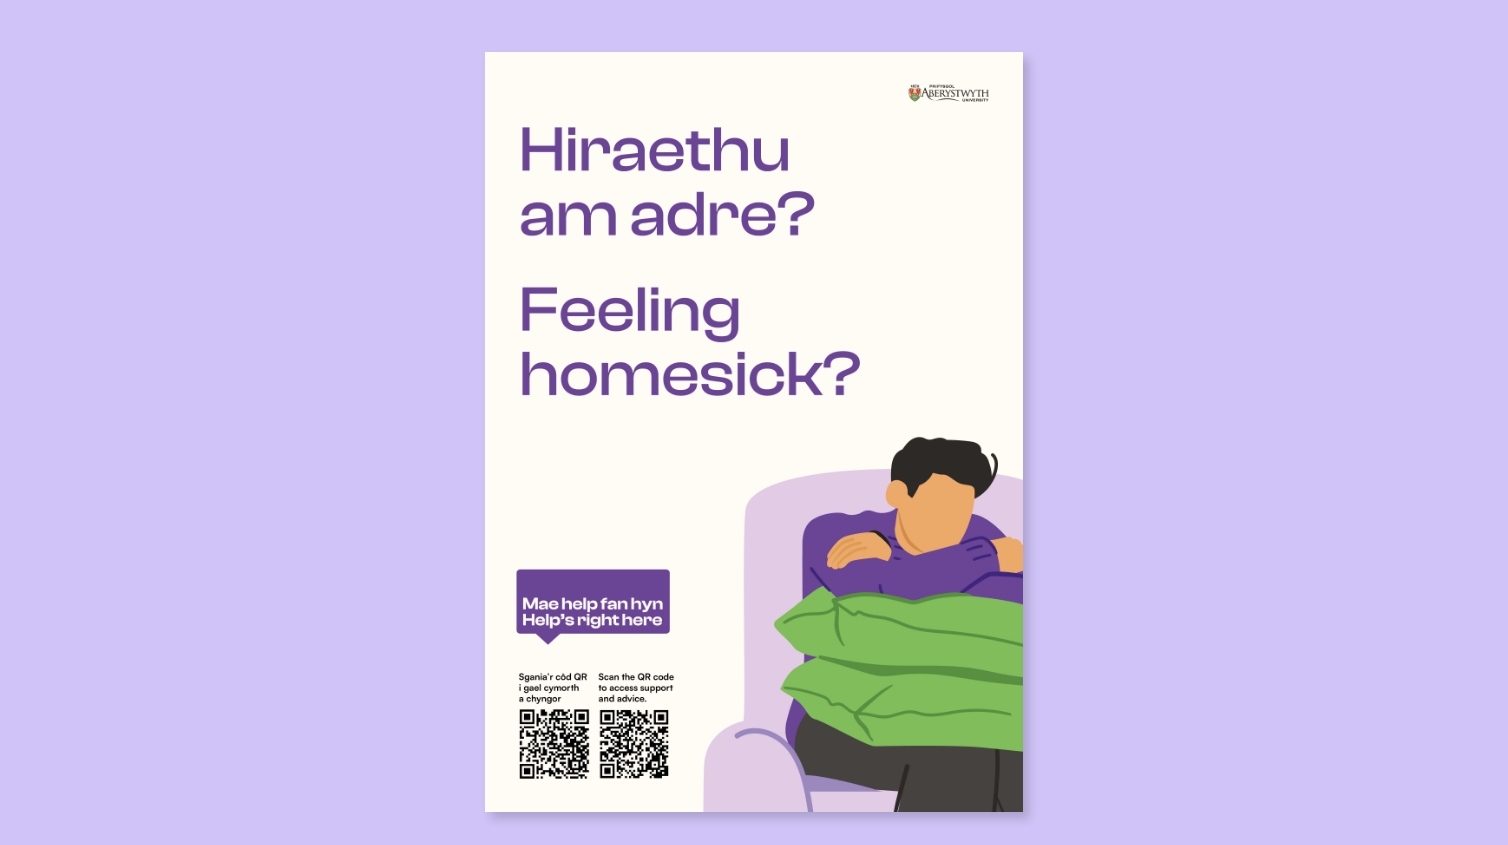 A graphic poster designed by a Design Agency UK with a purple background displays a person sitting in an armchair under a green blanket. Text reads 